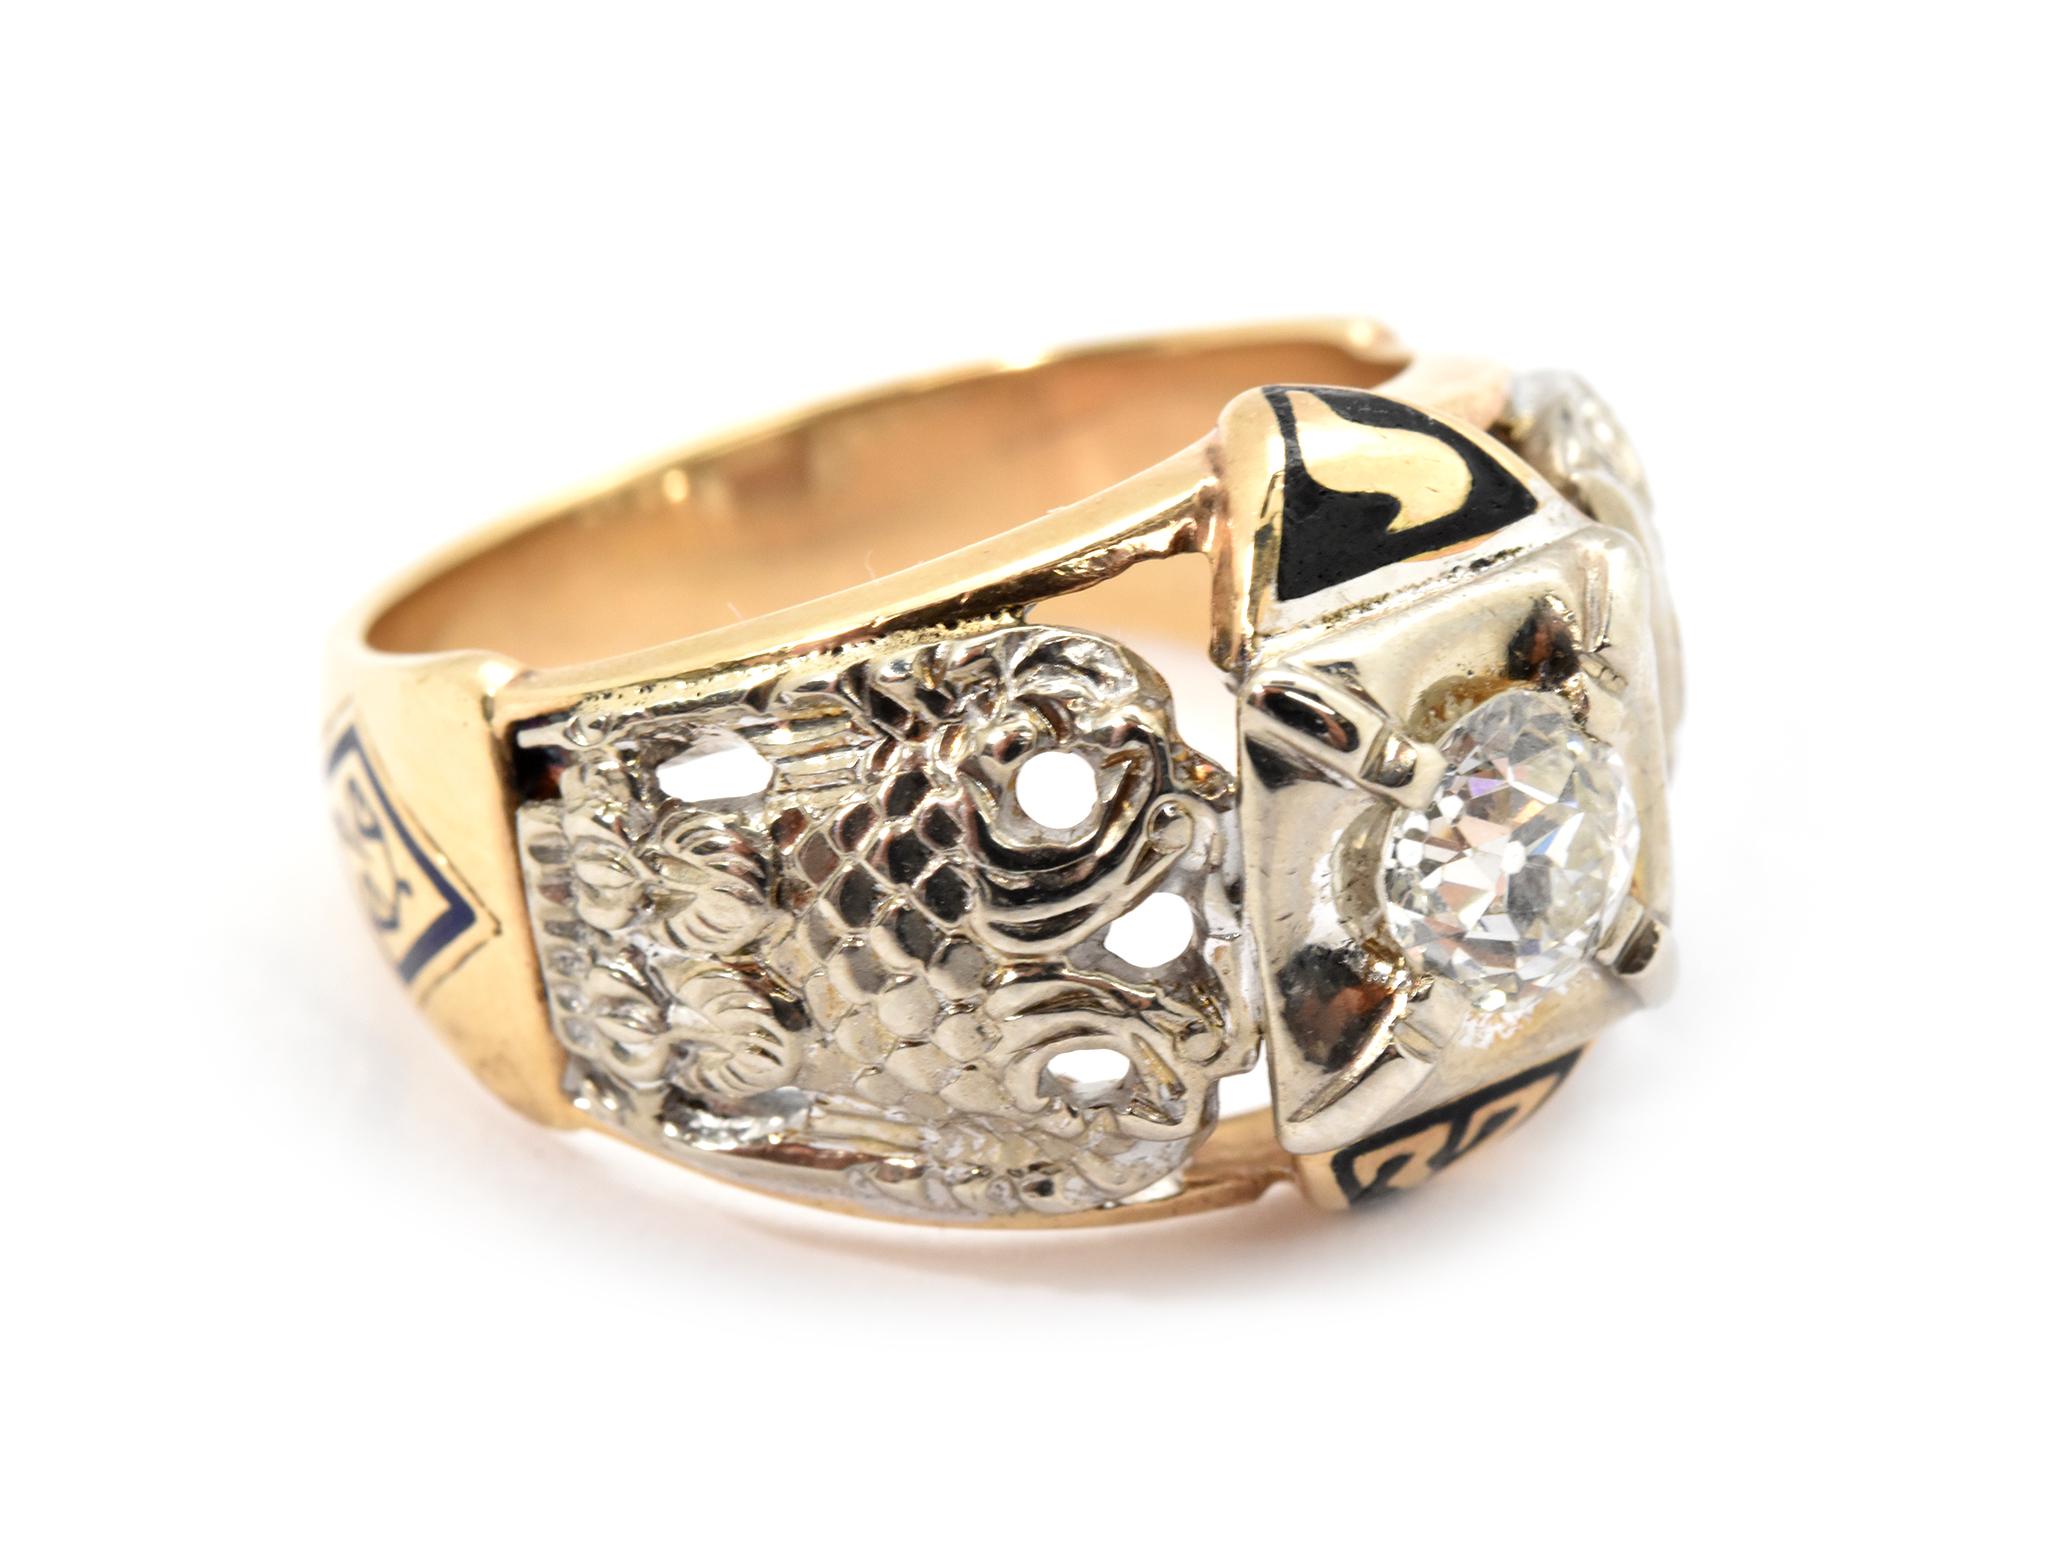 This ring is made in 10k yellow gold, and it holds a round brilliant diamond accented by Masonic symbols. The diamond weighs about 0.50ct, and it is graded I in color and SI1 in clarity. The ring measures 14mm wide, and it weighs 8.9 grams. The ring